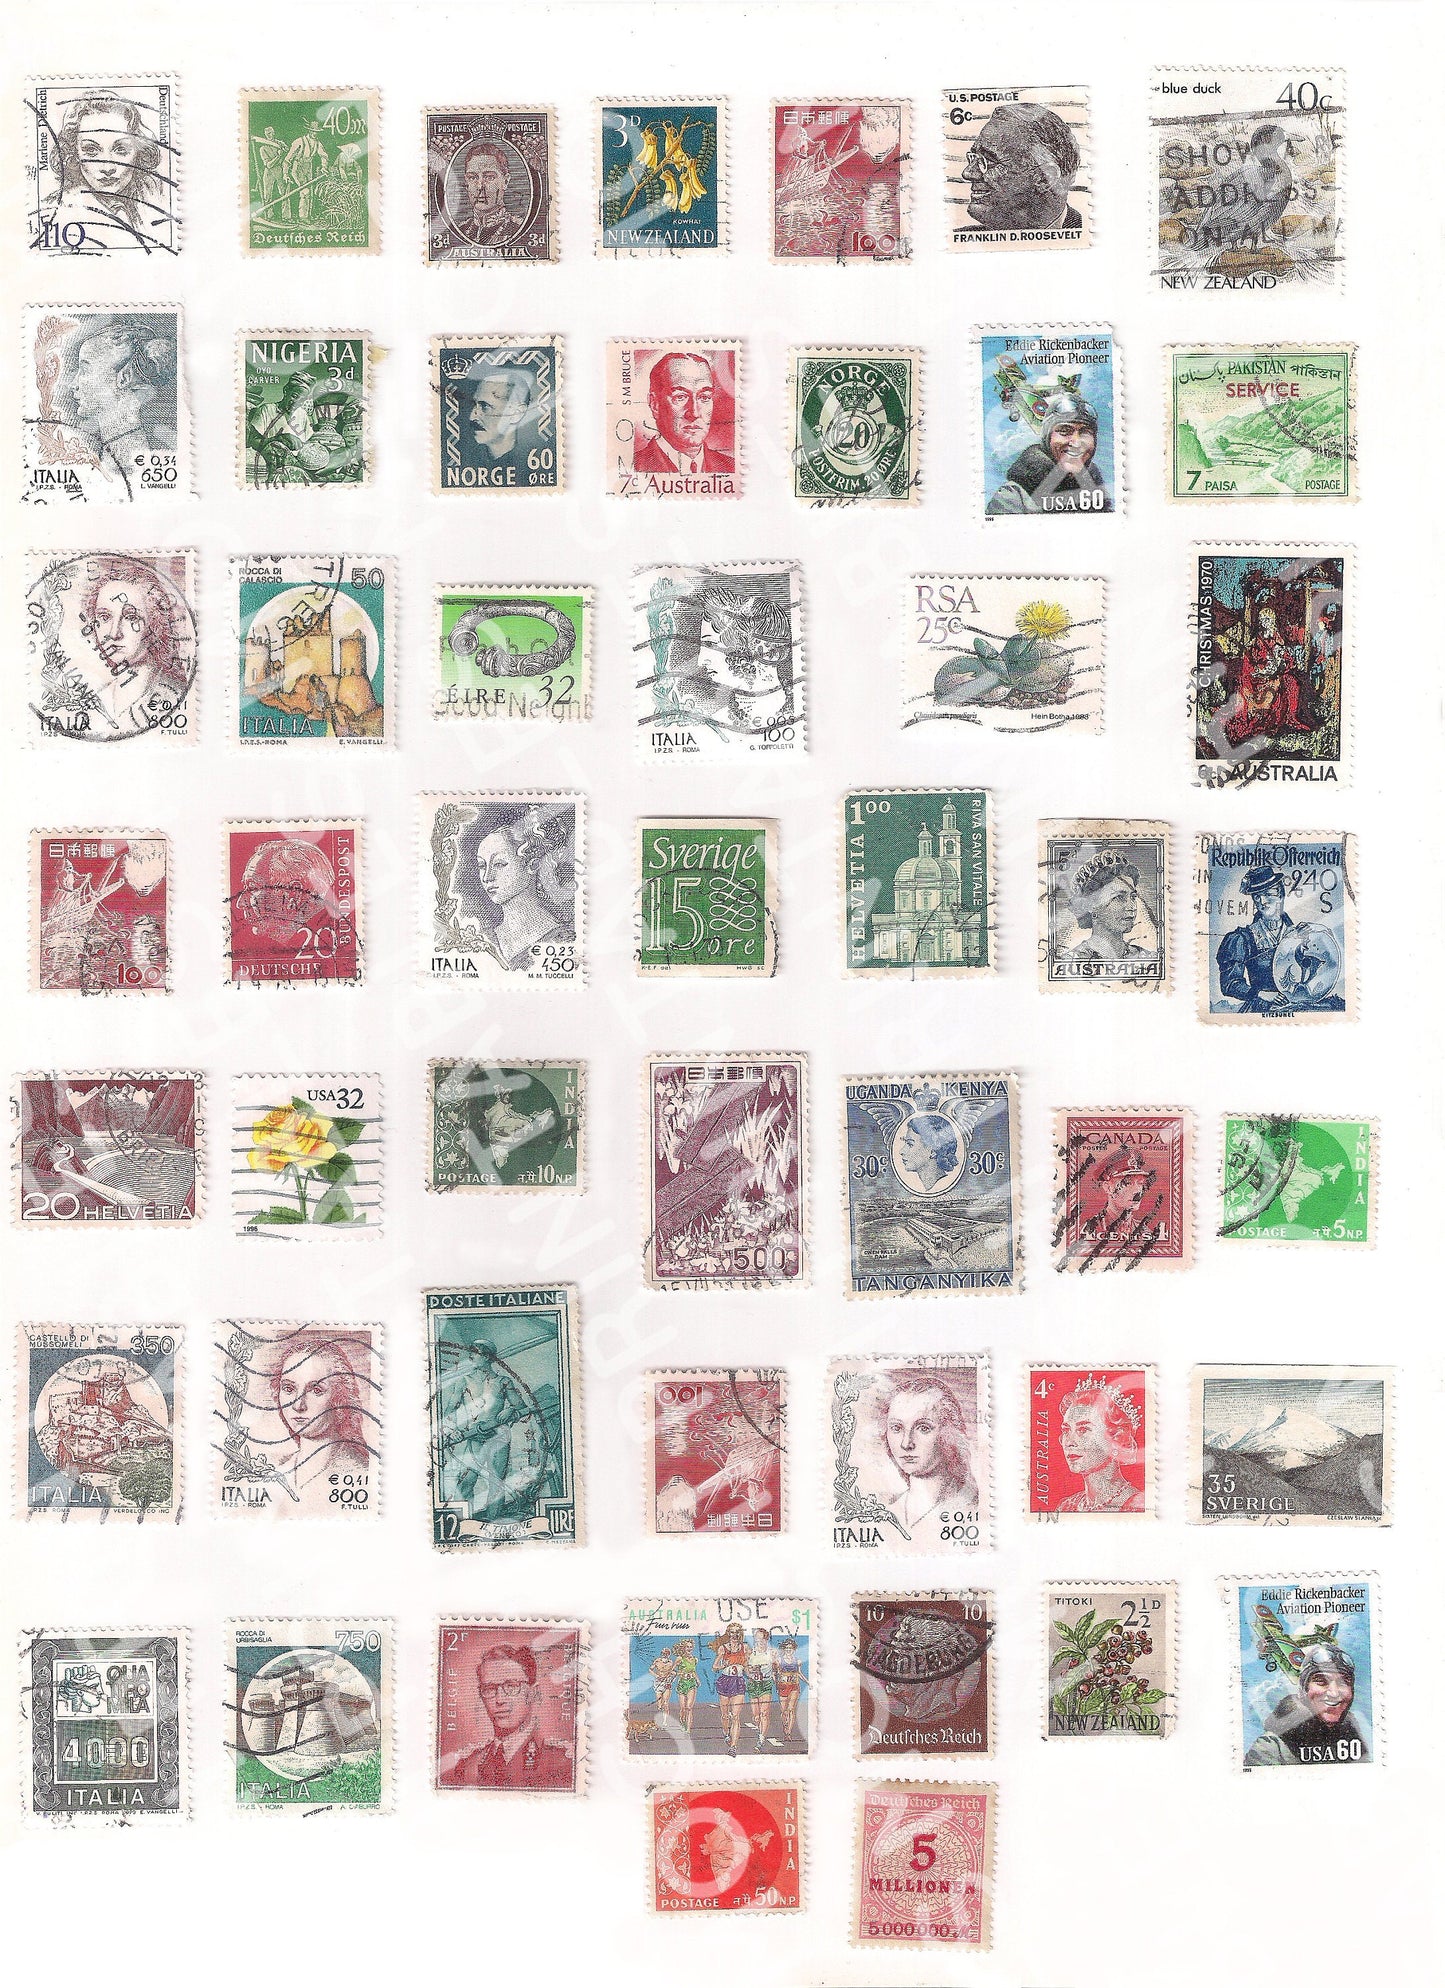 Vintage Postal Stamps From 60's & 70's Ephemera Digital Printable Collage  Sheets, Retro State, Olympic, and Moon Stamps 